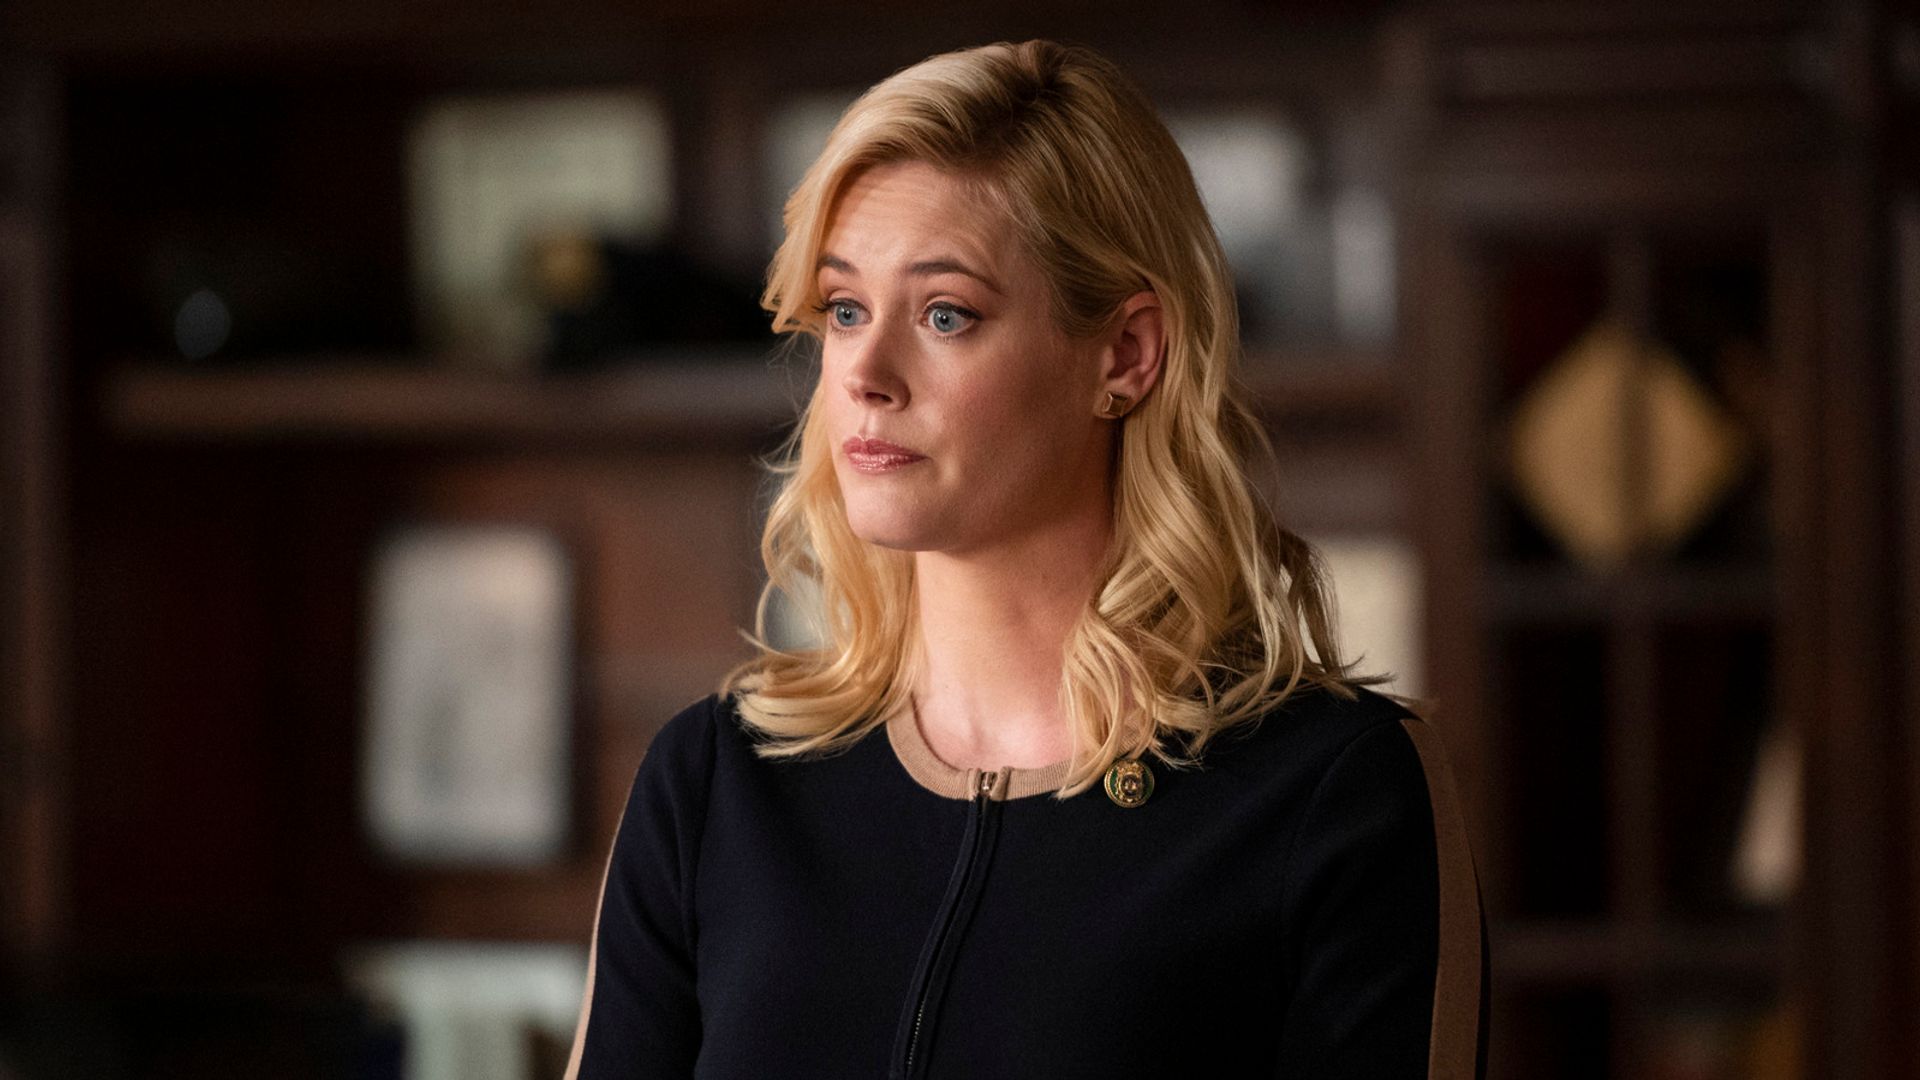 Blue Bloods star Abigail Hawk reflects on her life as hit show comes to an end